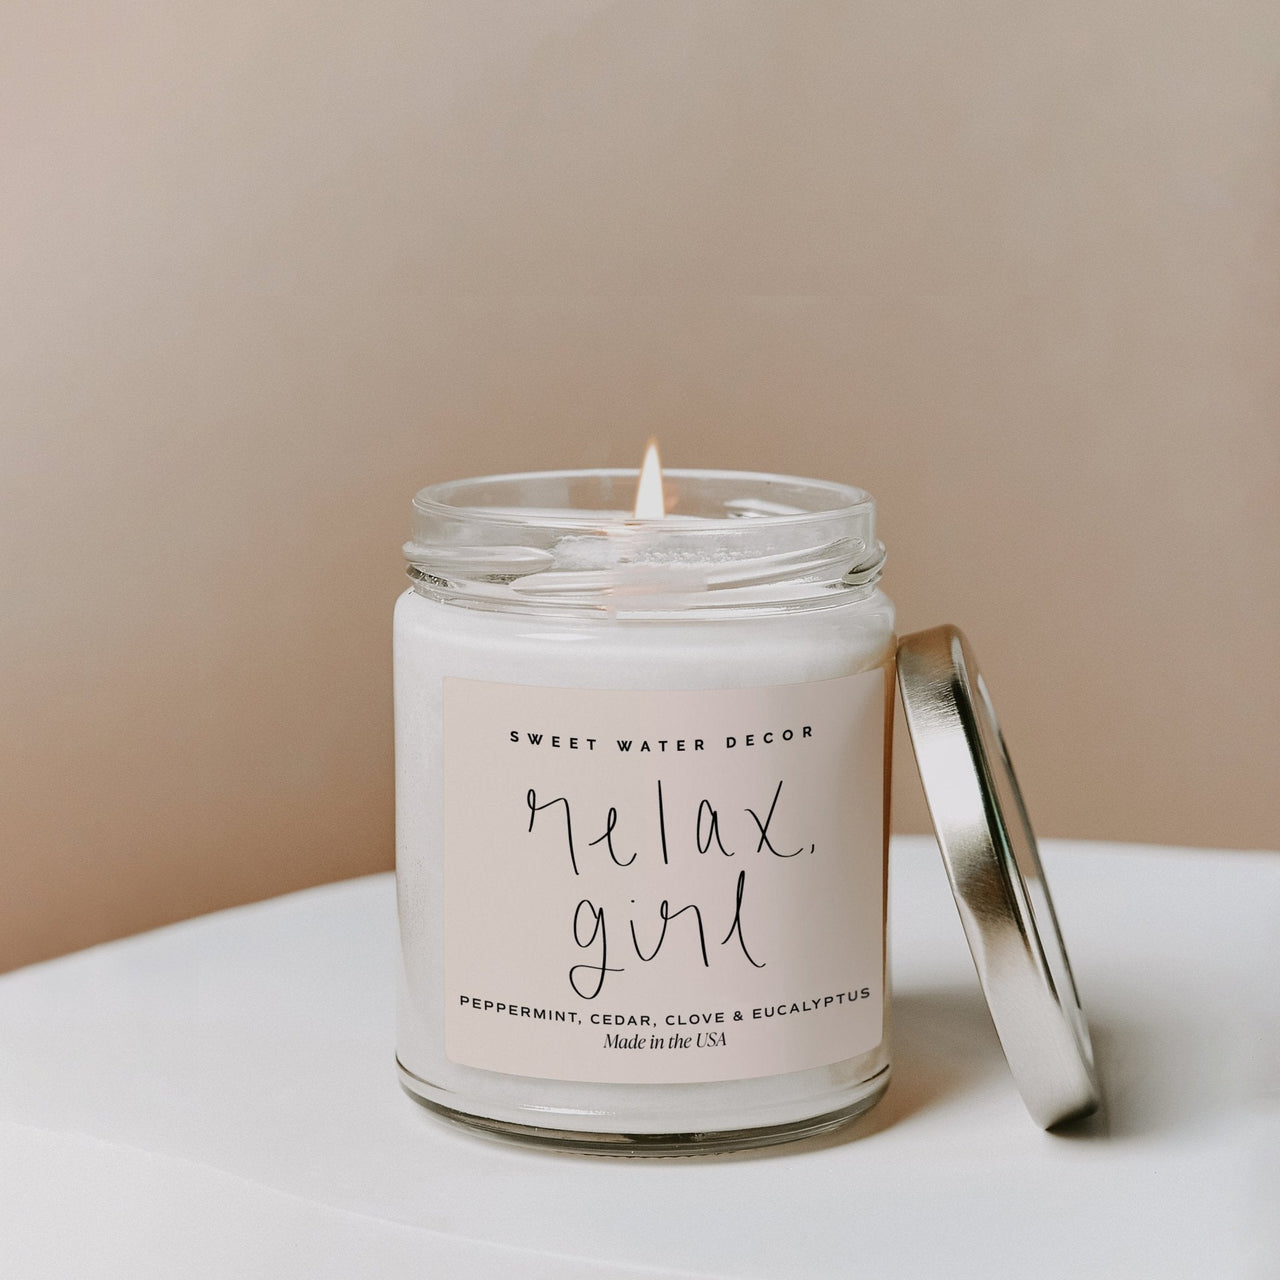 Relax, Girl Soy Candle - Clear Jar - 9 oz - Tony's Home Furnishings